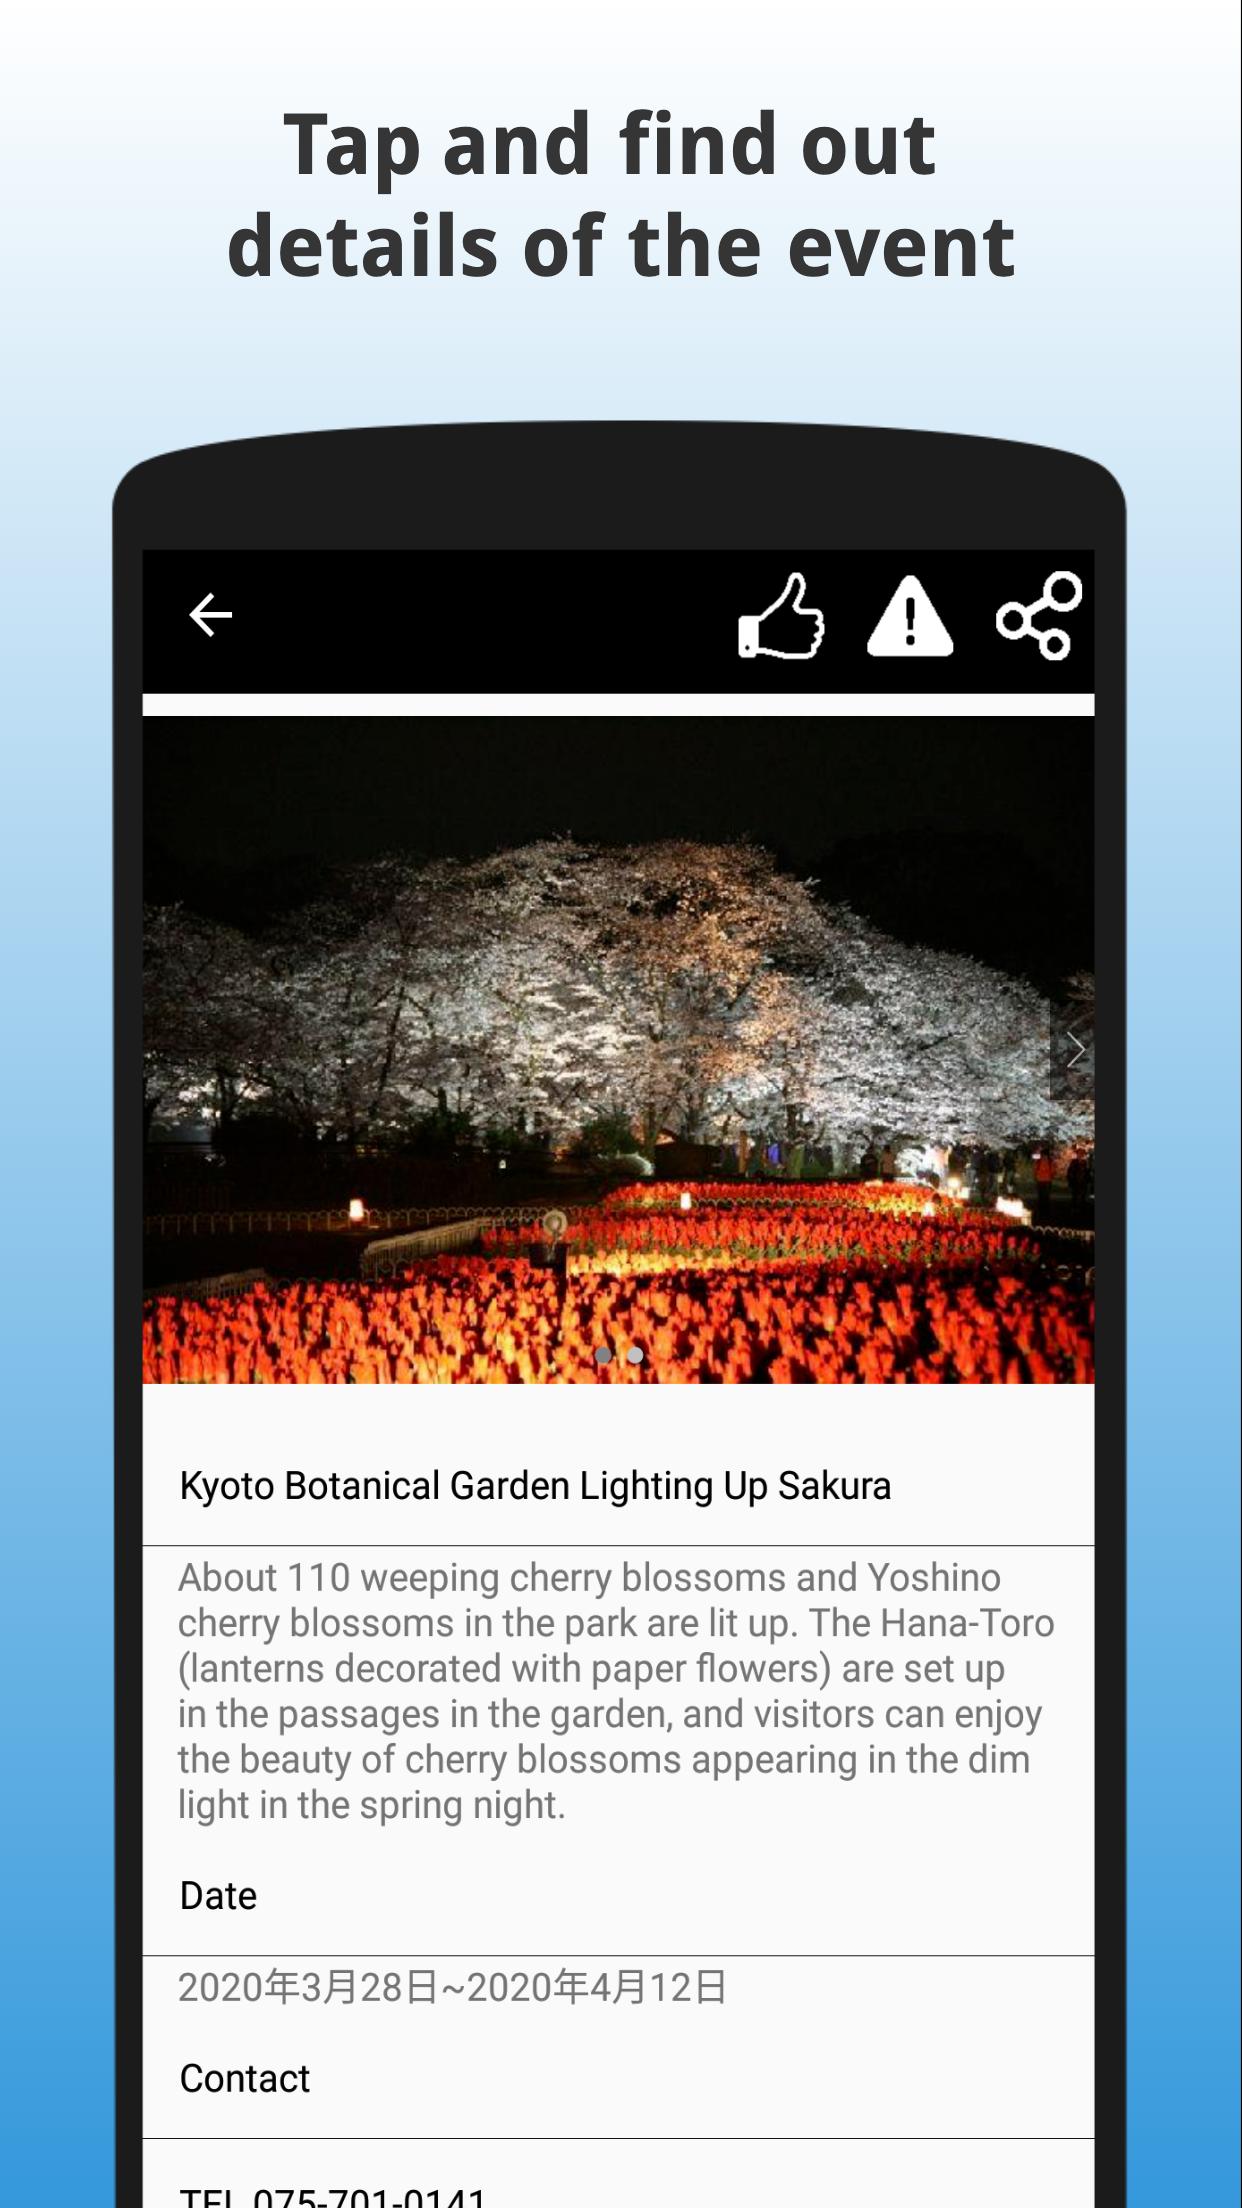 EVENTA - Search & Post Events Near You in Japan 1.0.15 Screenshot 2